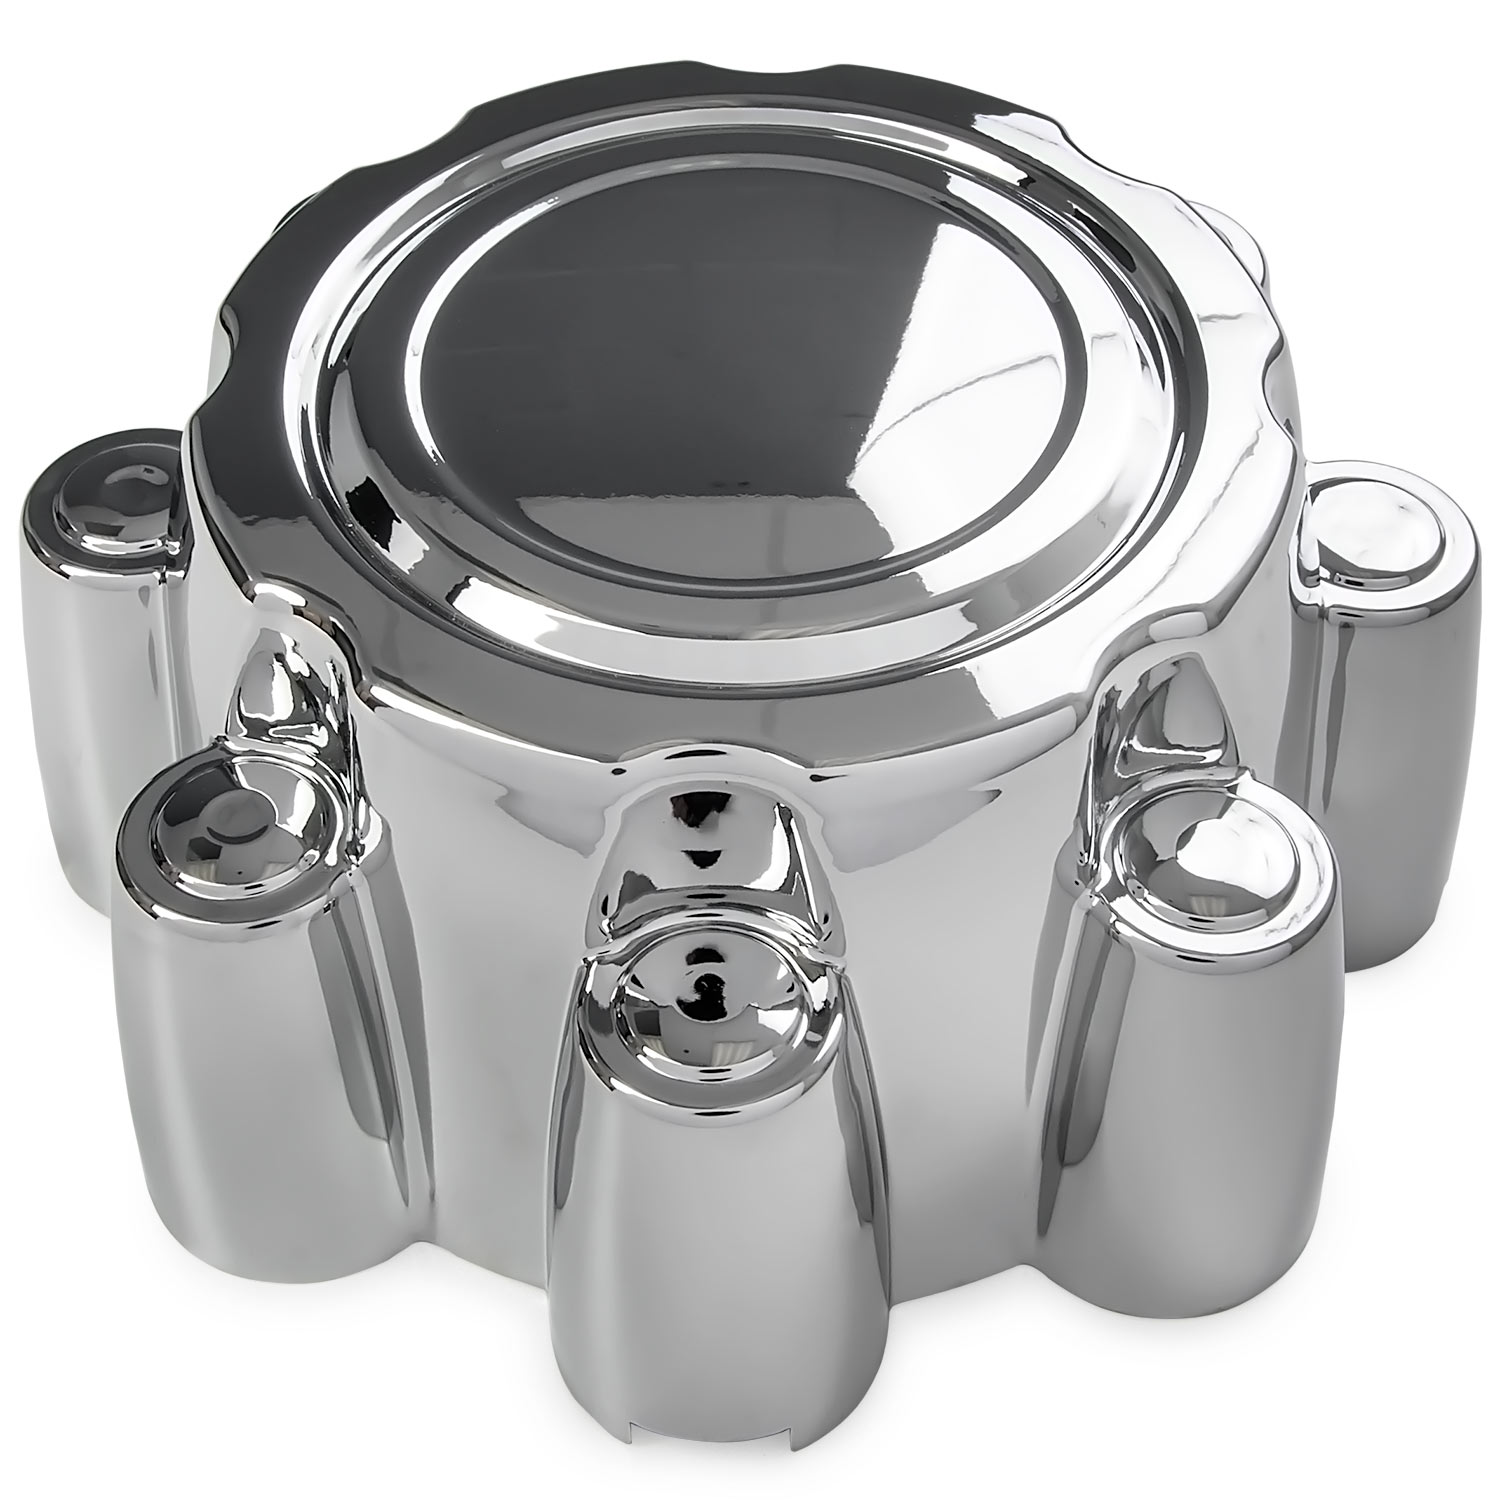 Krator 4x Chrome Center Caps Wheel Lug Nut Hub Cap Covers Compatible with 1999-2005 Ford F250 SuperDuty